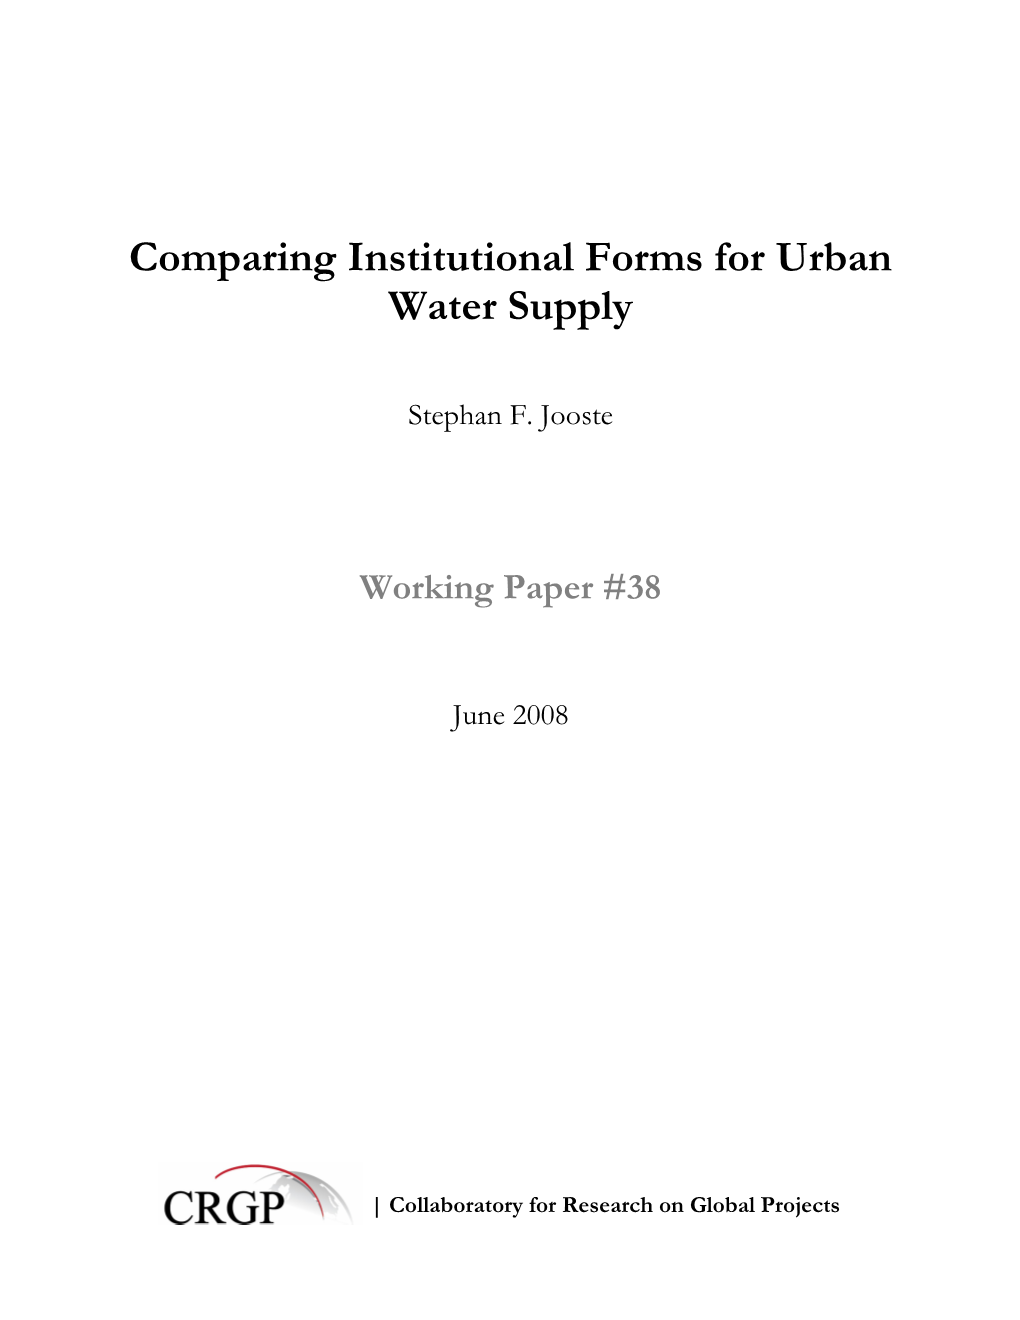 Comparing Institutional Forms for Urban Water Supply